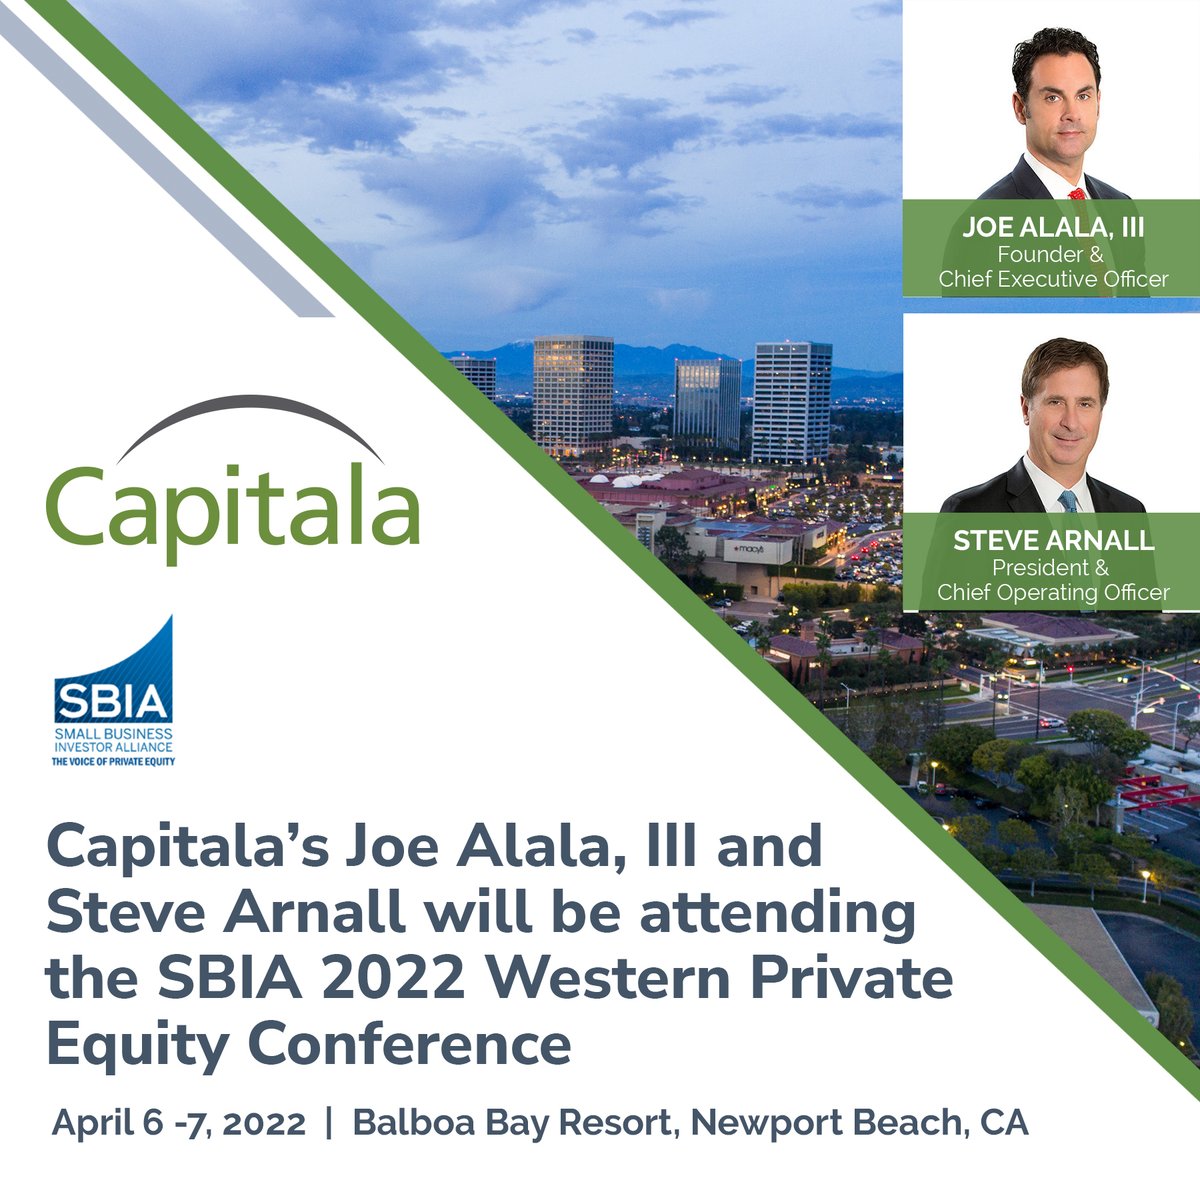 Joe Alala, III and Steve Arnall of Capitala Group will be attending the SBIA Western Private Equity Conference this week in Newport Beach, California.  Reach out if you plan to be there and would like to connect!  #SBIAWesternPE #privateequity #SBIA #lowermiddlemarket #networking